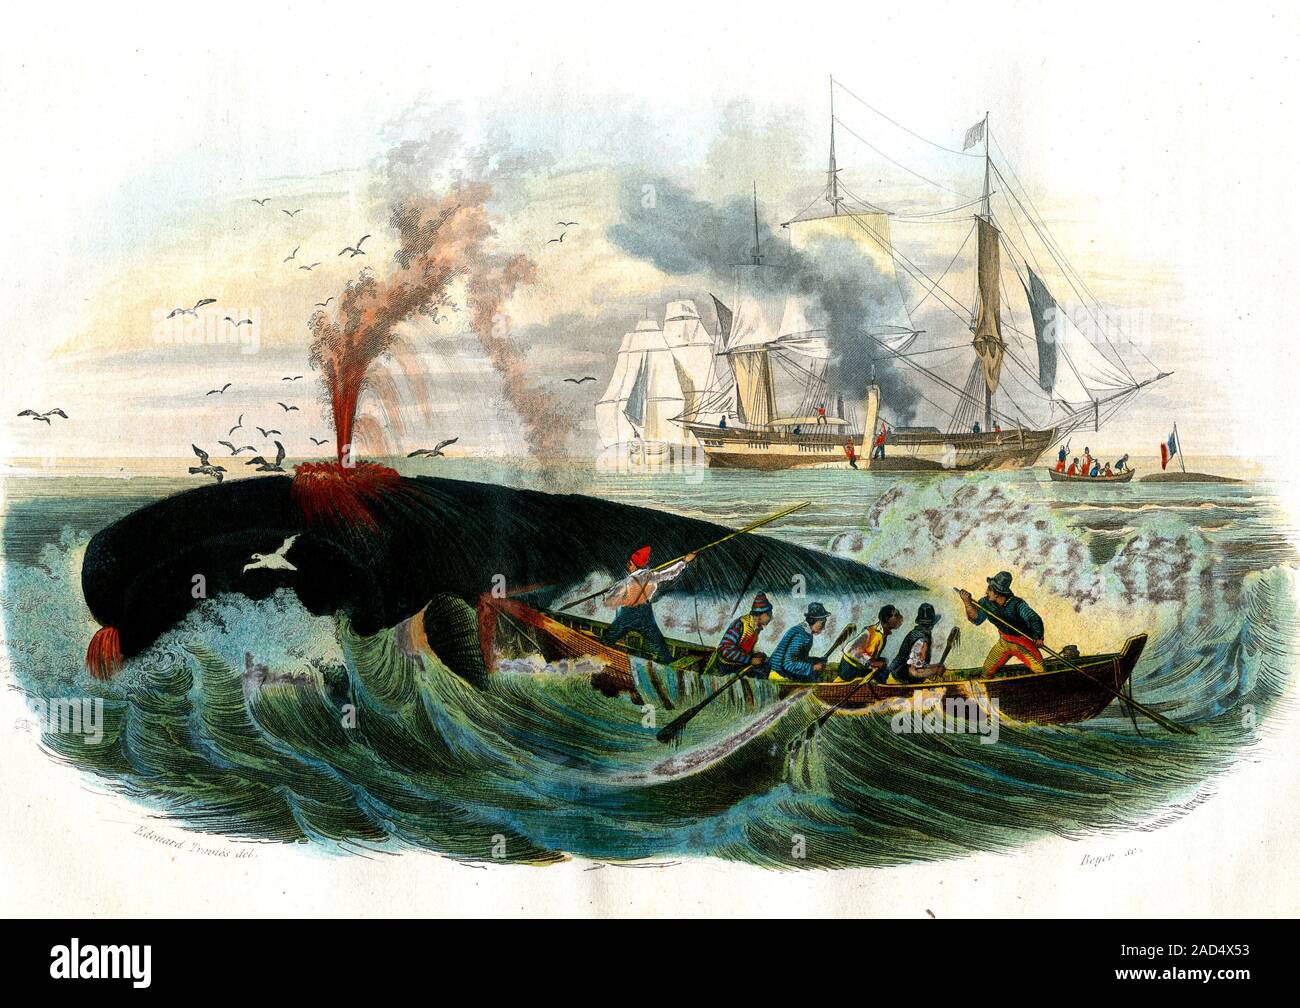 Whale hunting. 19th-century illustration of whalers in a whaling boat using a harpoon to hunt a whale. This artwork dates from 1857. Stock Photo